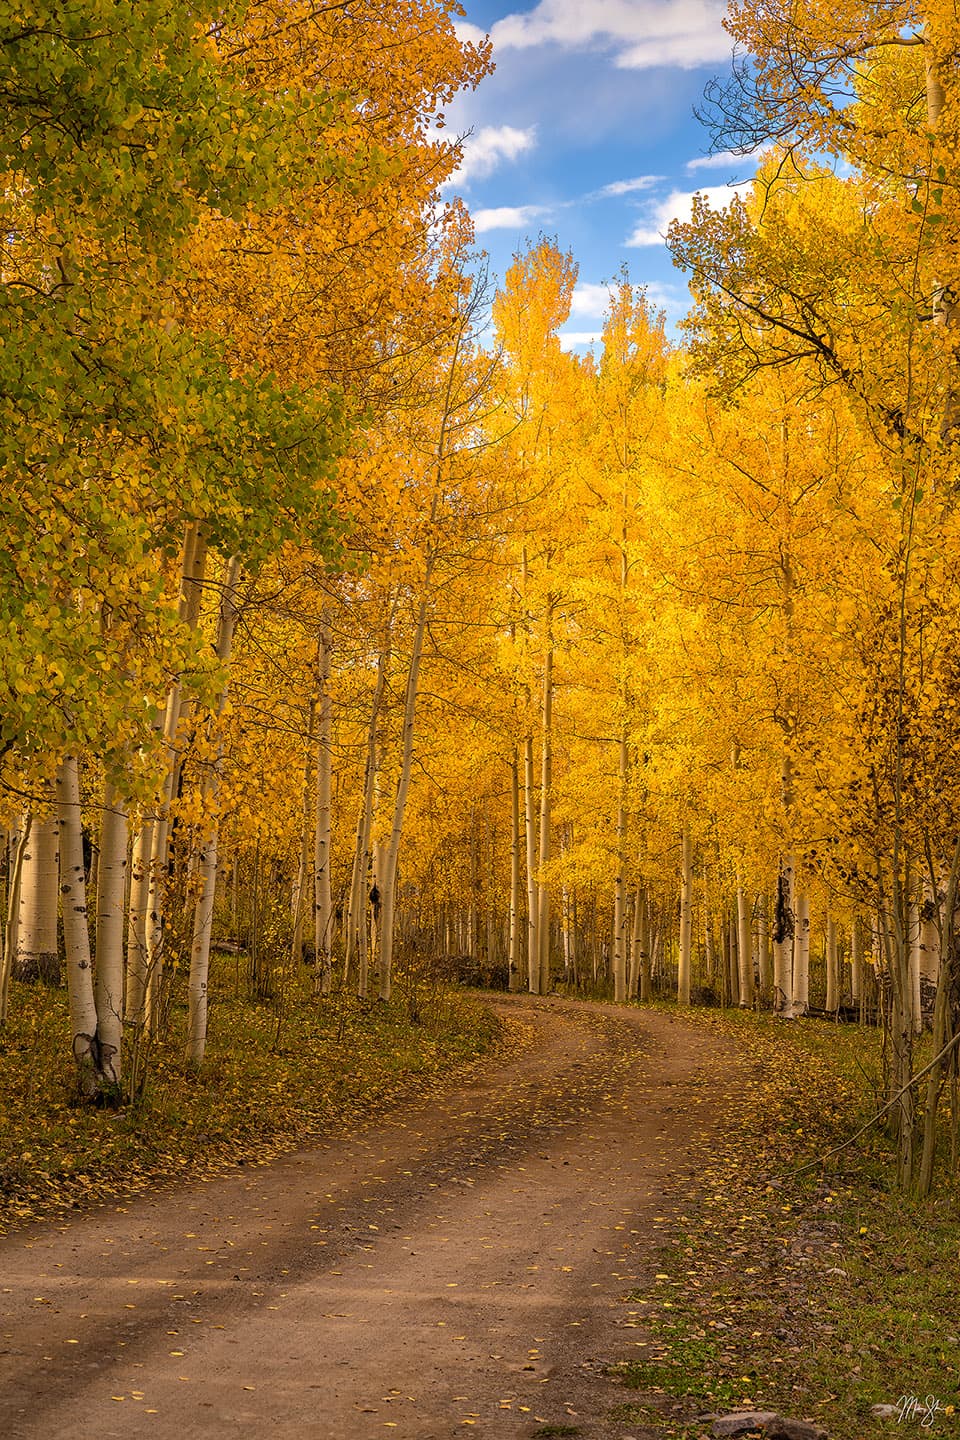 A beautiful blue sky adds a splash of contrasting color to the amazing fall colors of this winding road through an aspen stand in the San Juans of southwest Colorado.